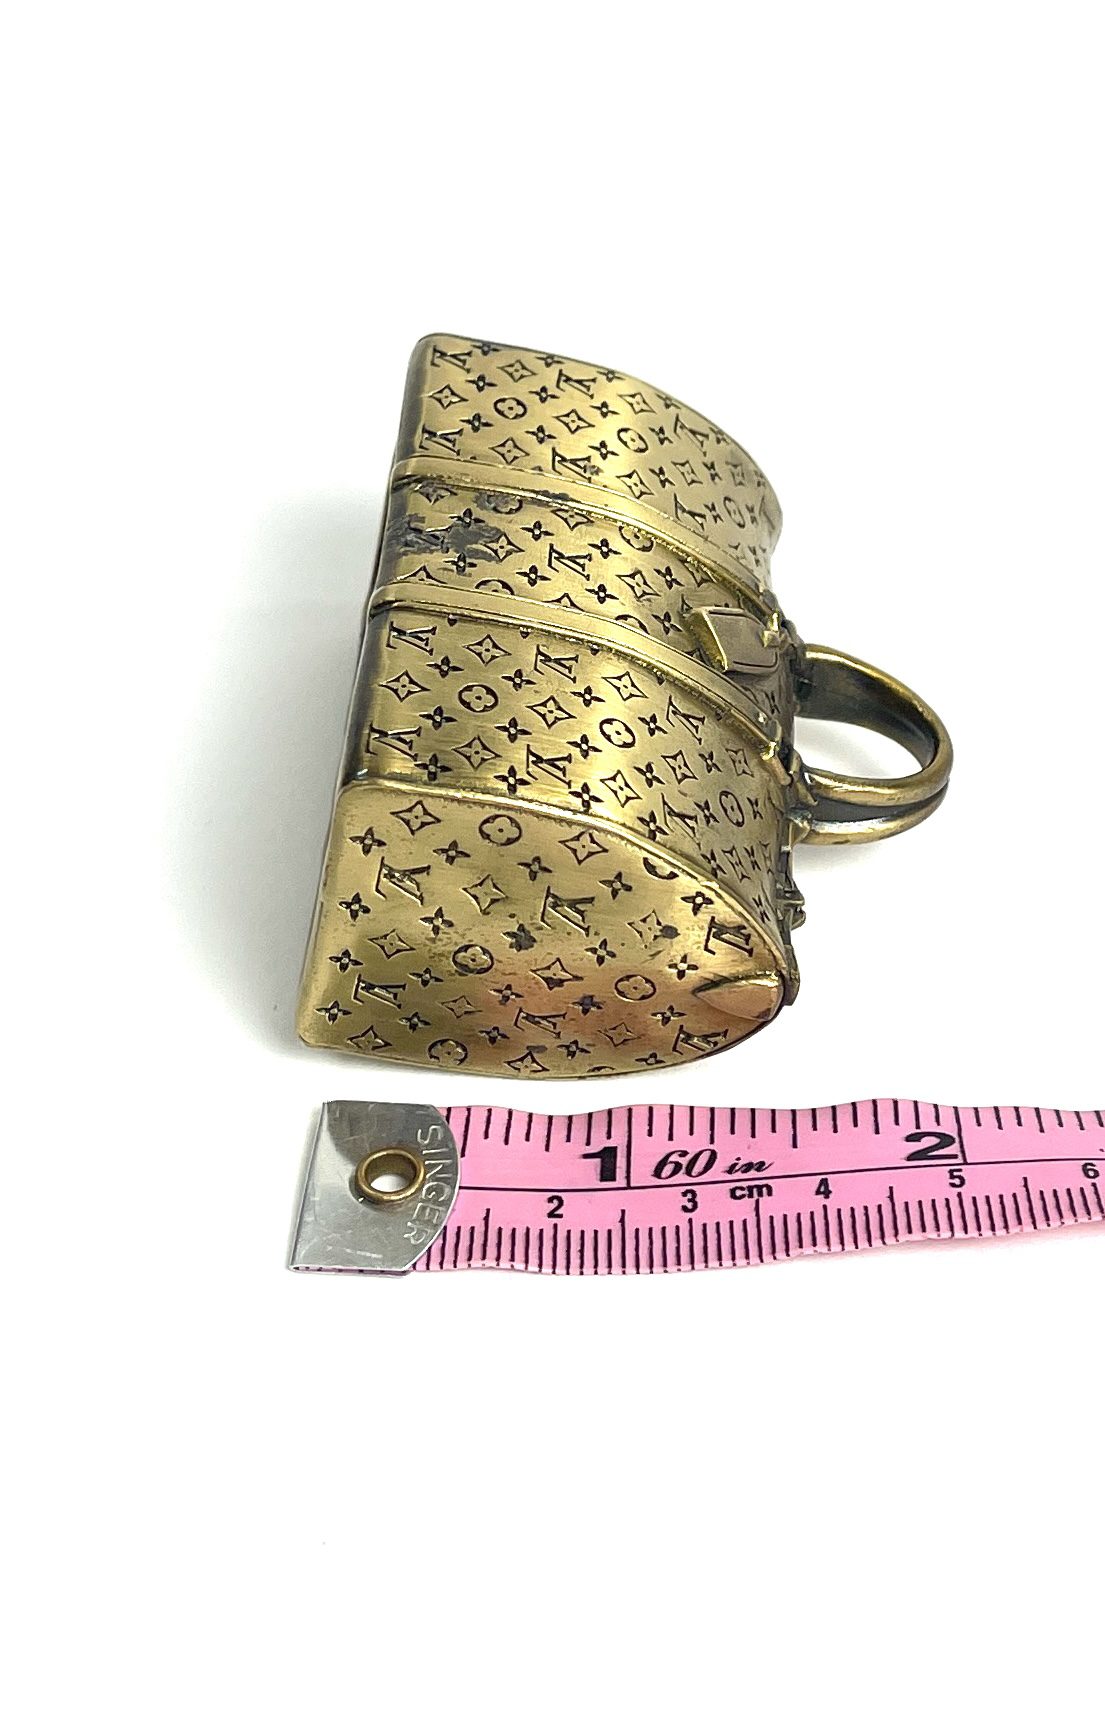 Louis Vuitton Gold Keepall Paperweight-VIP Limited Collectible For